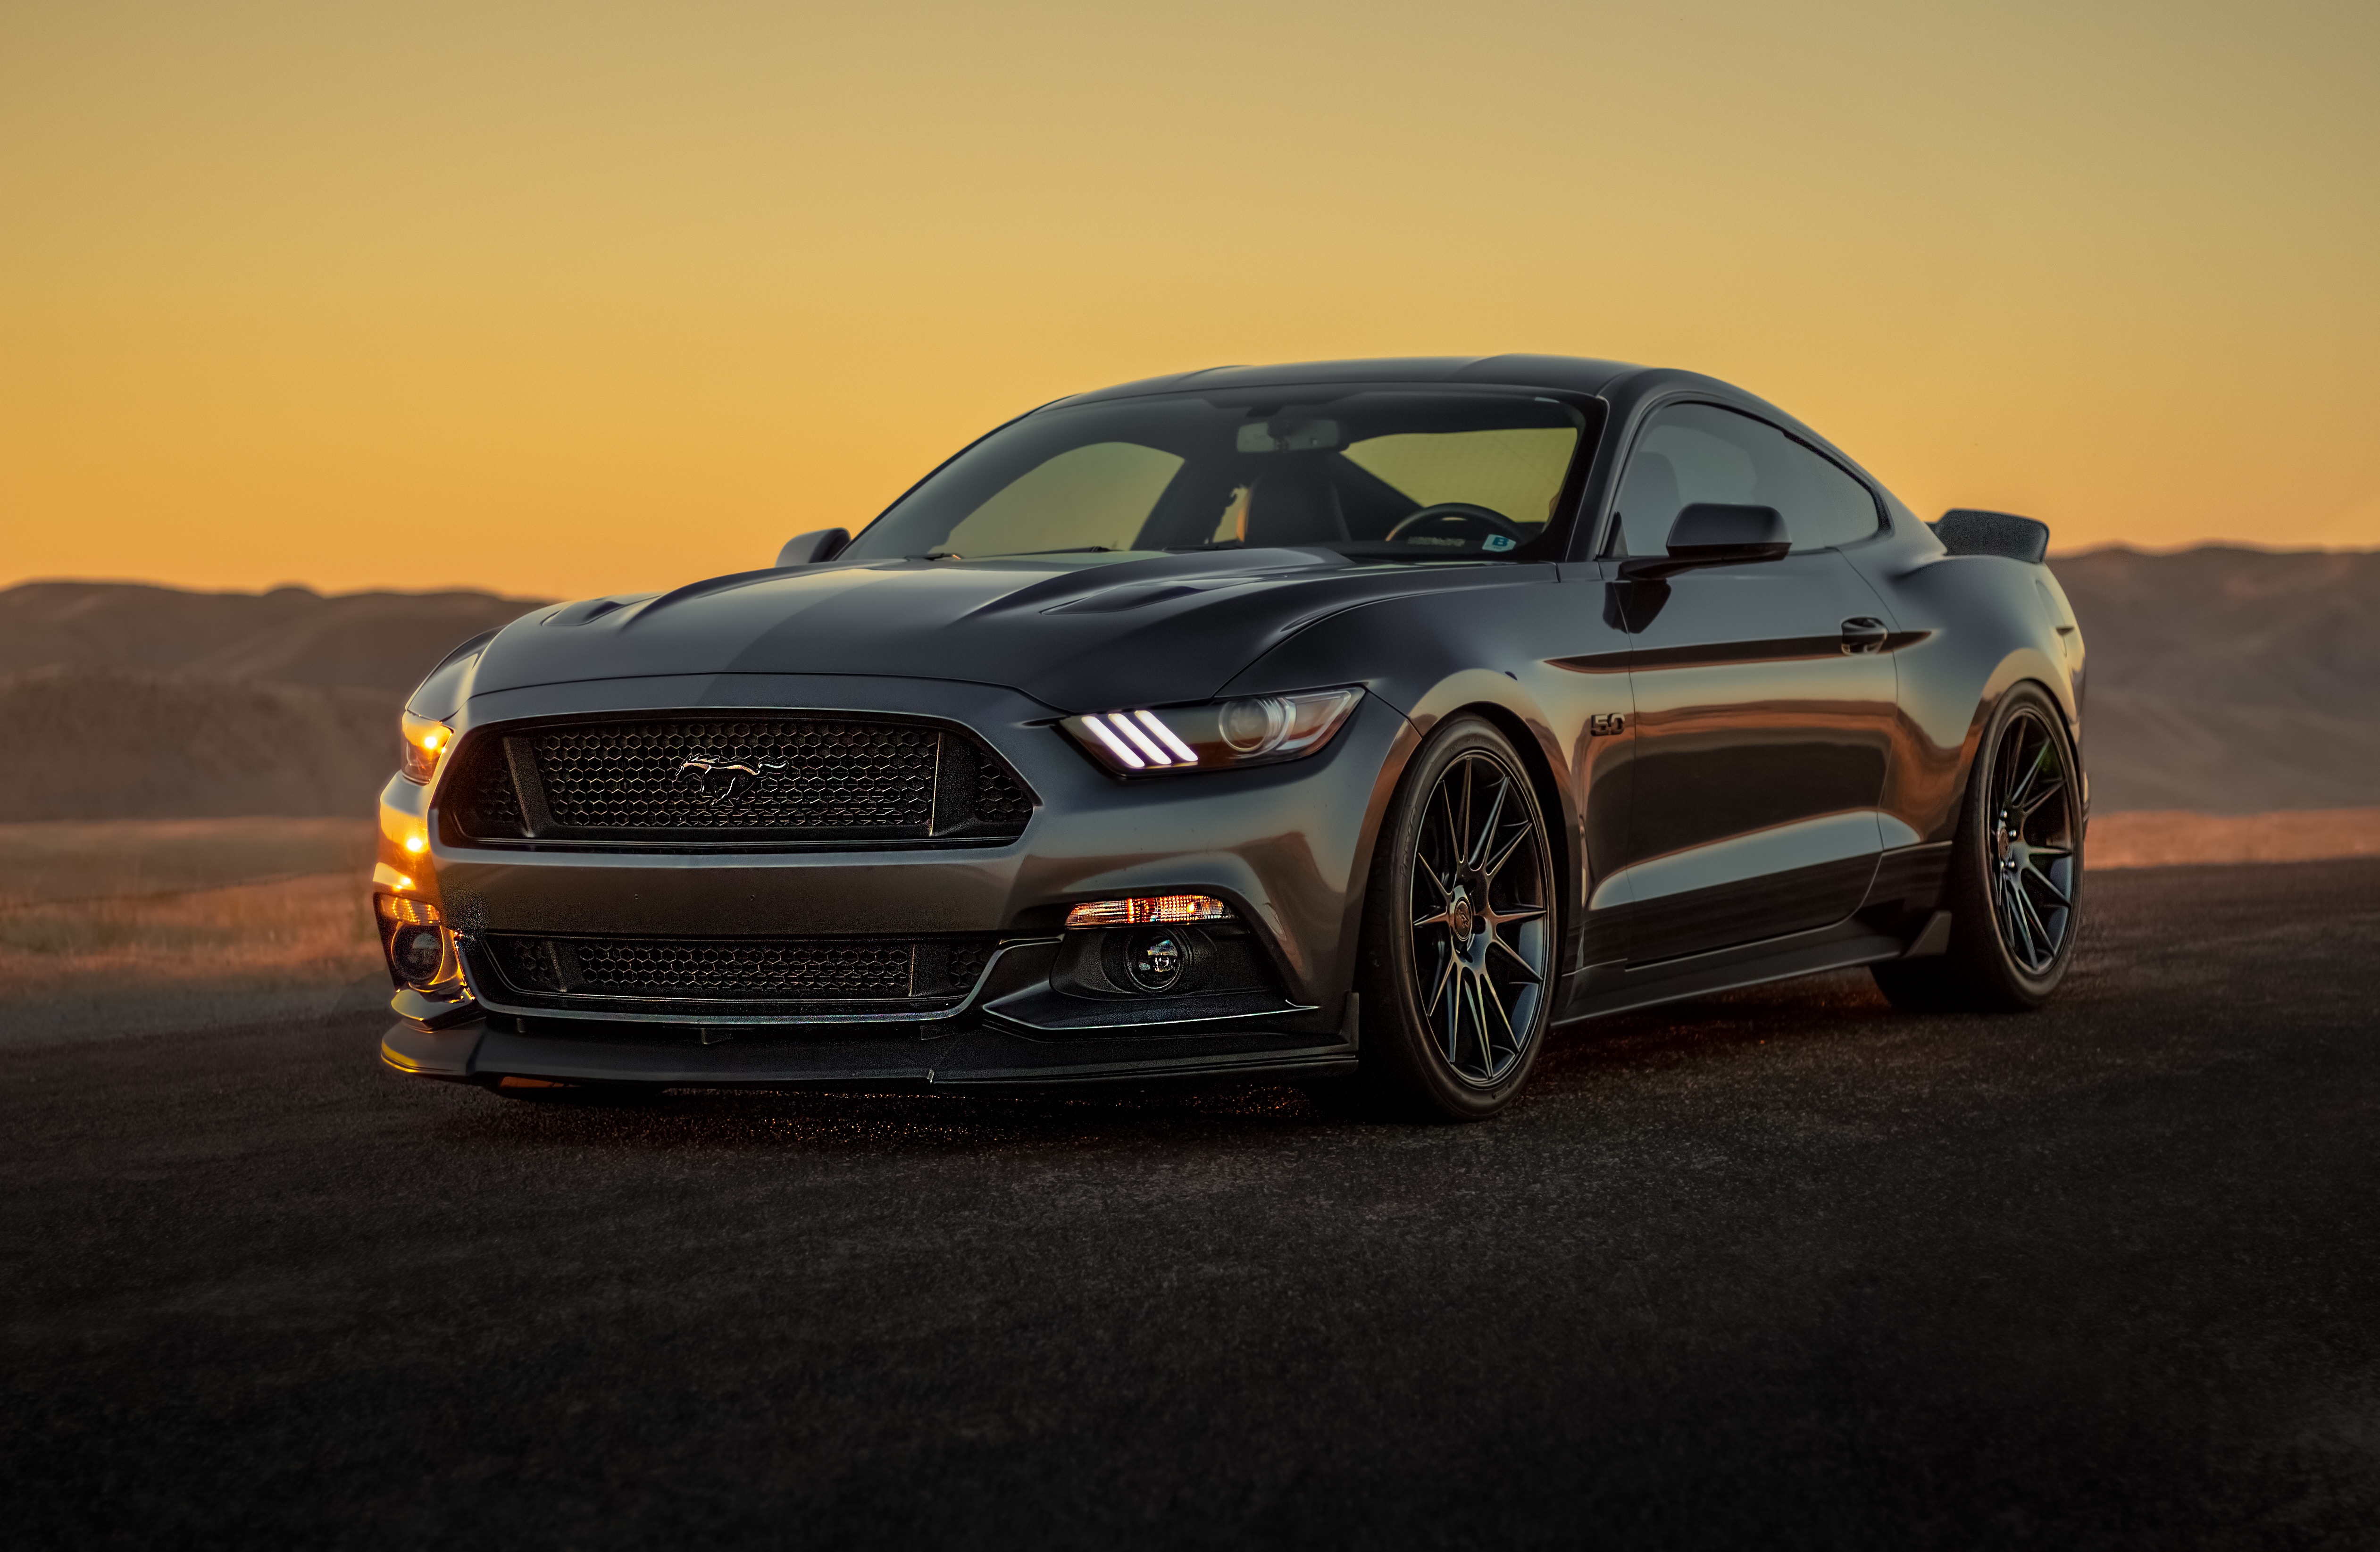 ford mustang, cars, sunset, ford, grey, bumper